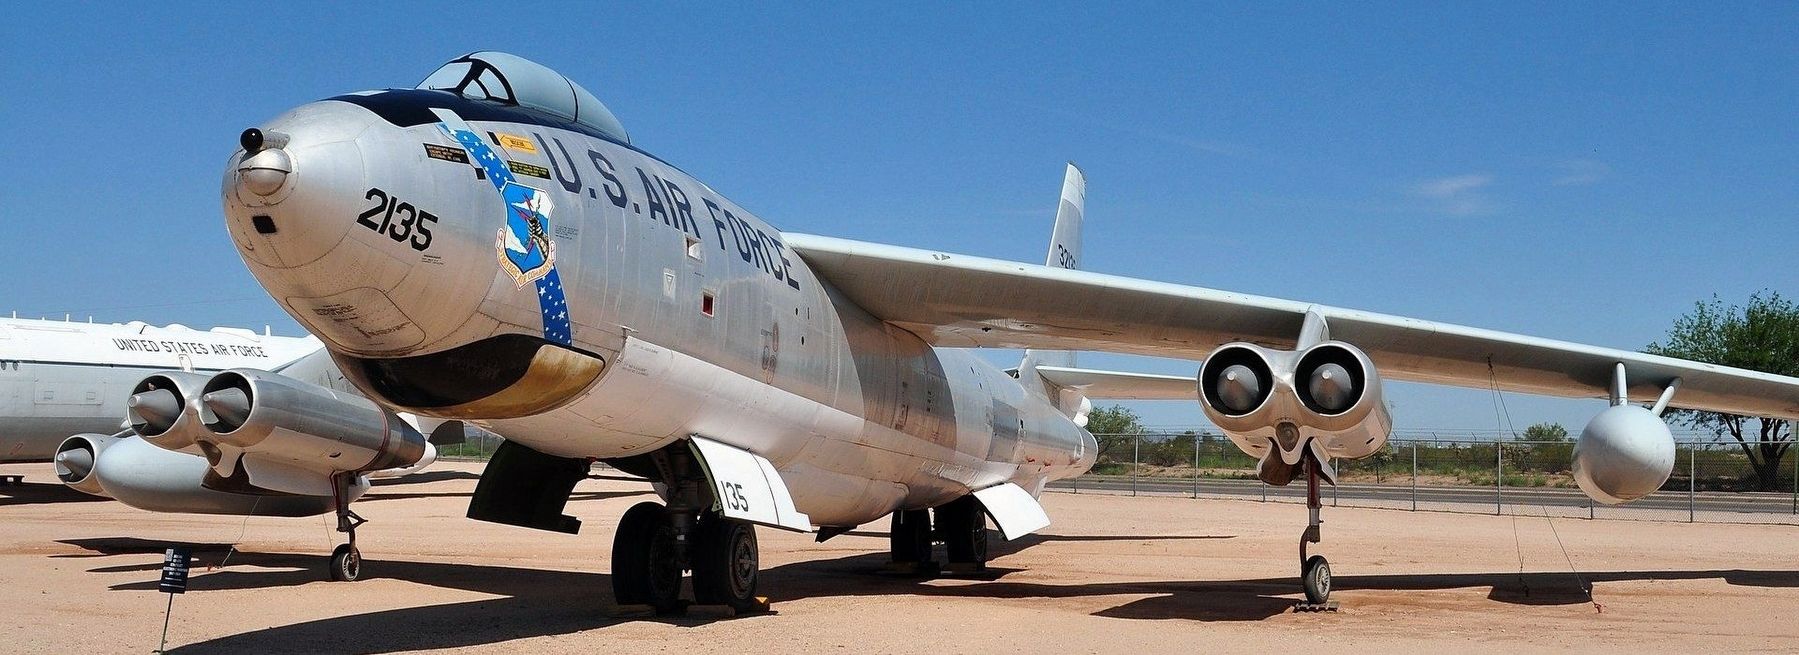 B-47E from Lockbourne AFB at Pima Air Museum image. Click for full size.